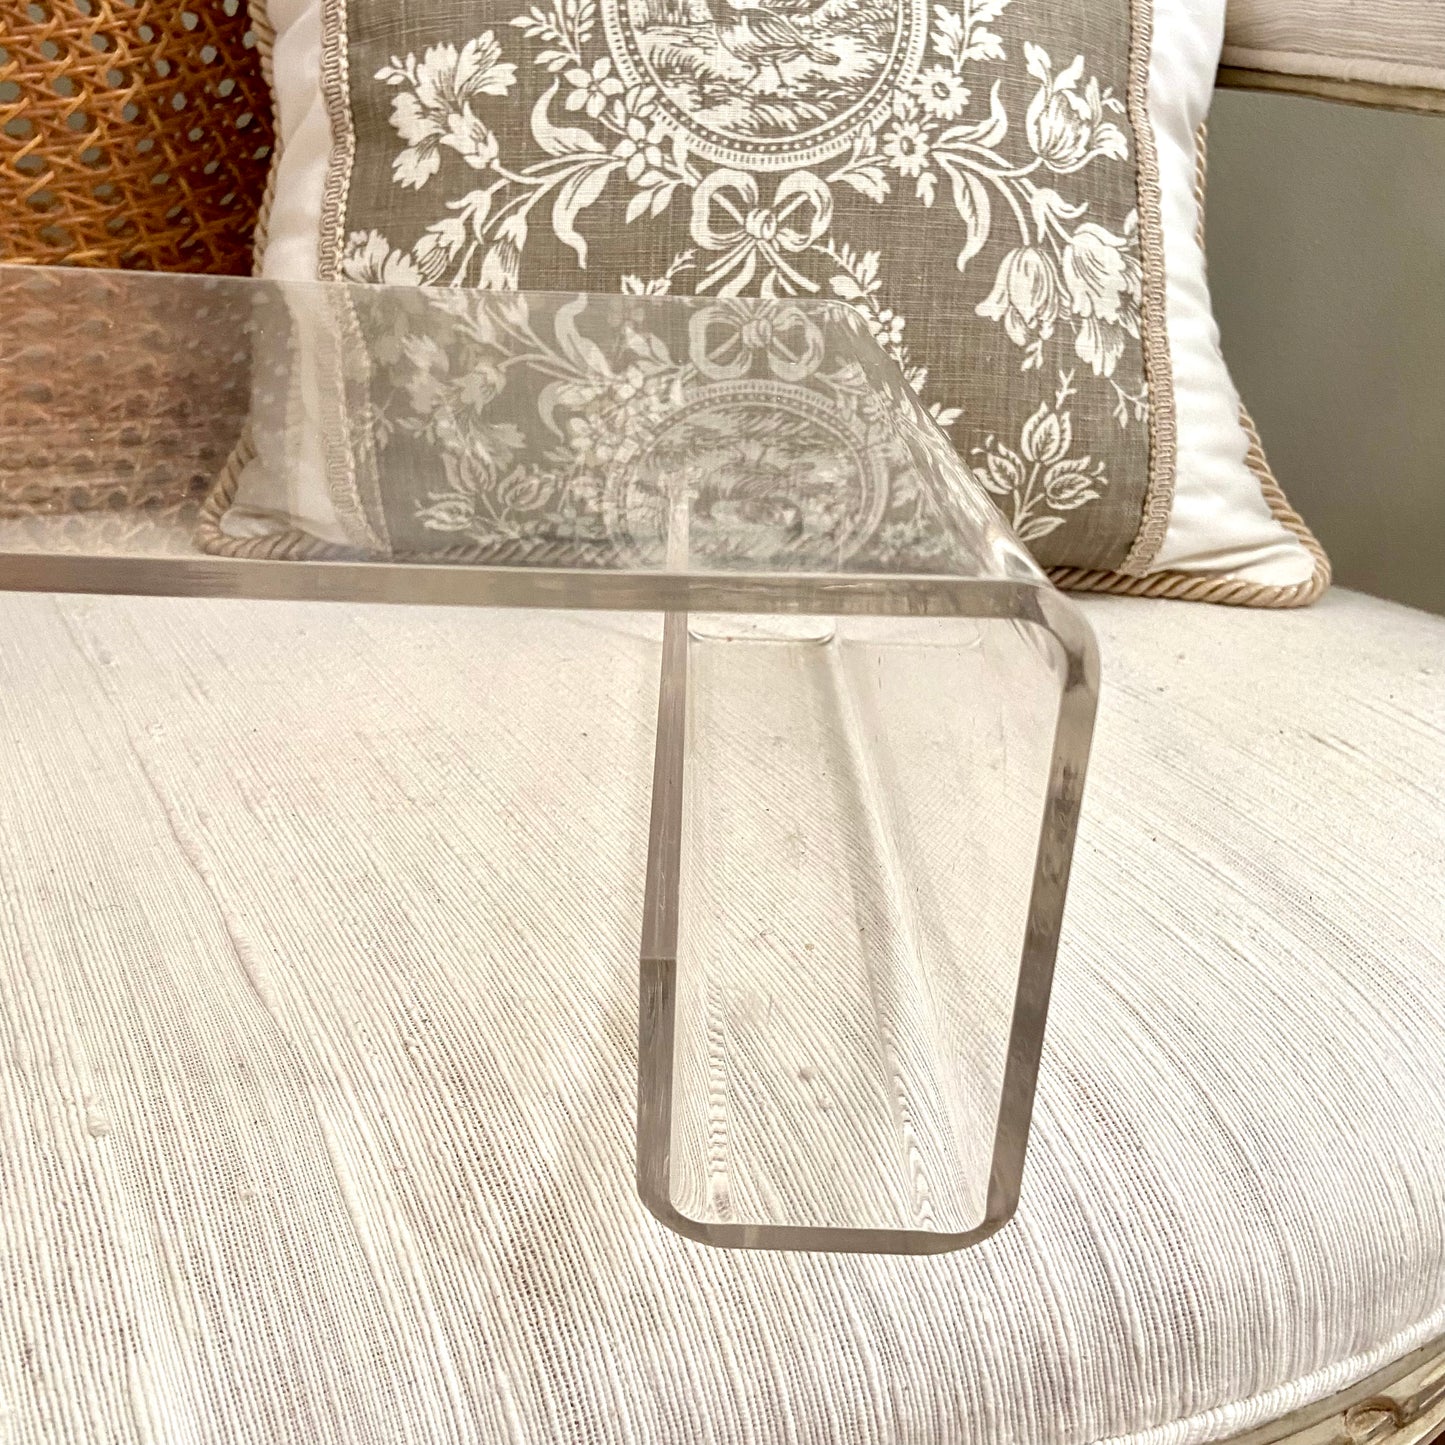 Vintage contemporary acrylic lucite tray table for breakfast in bed